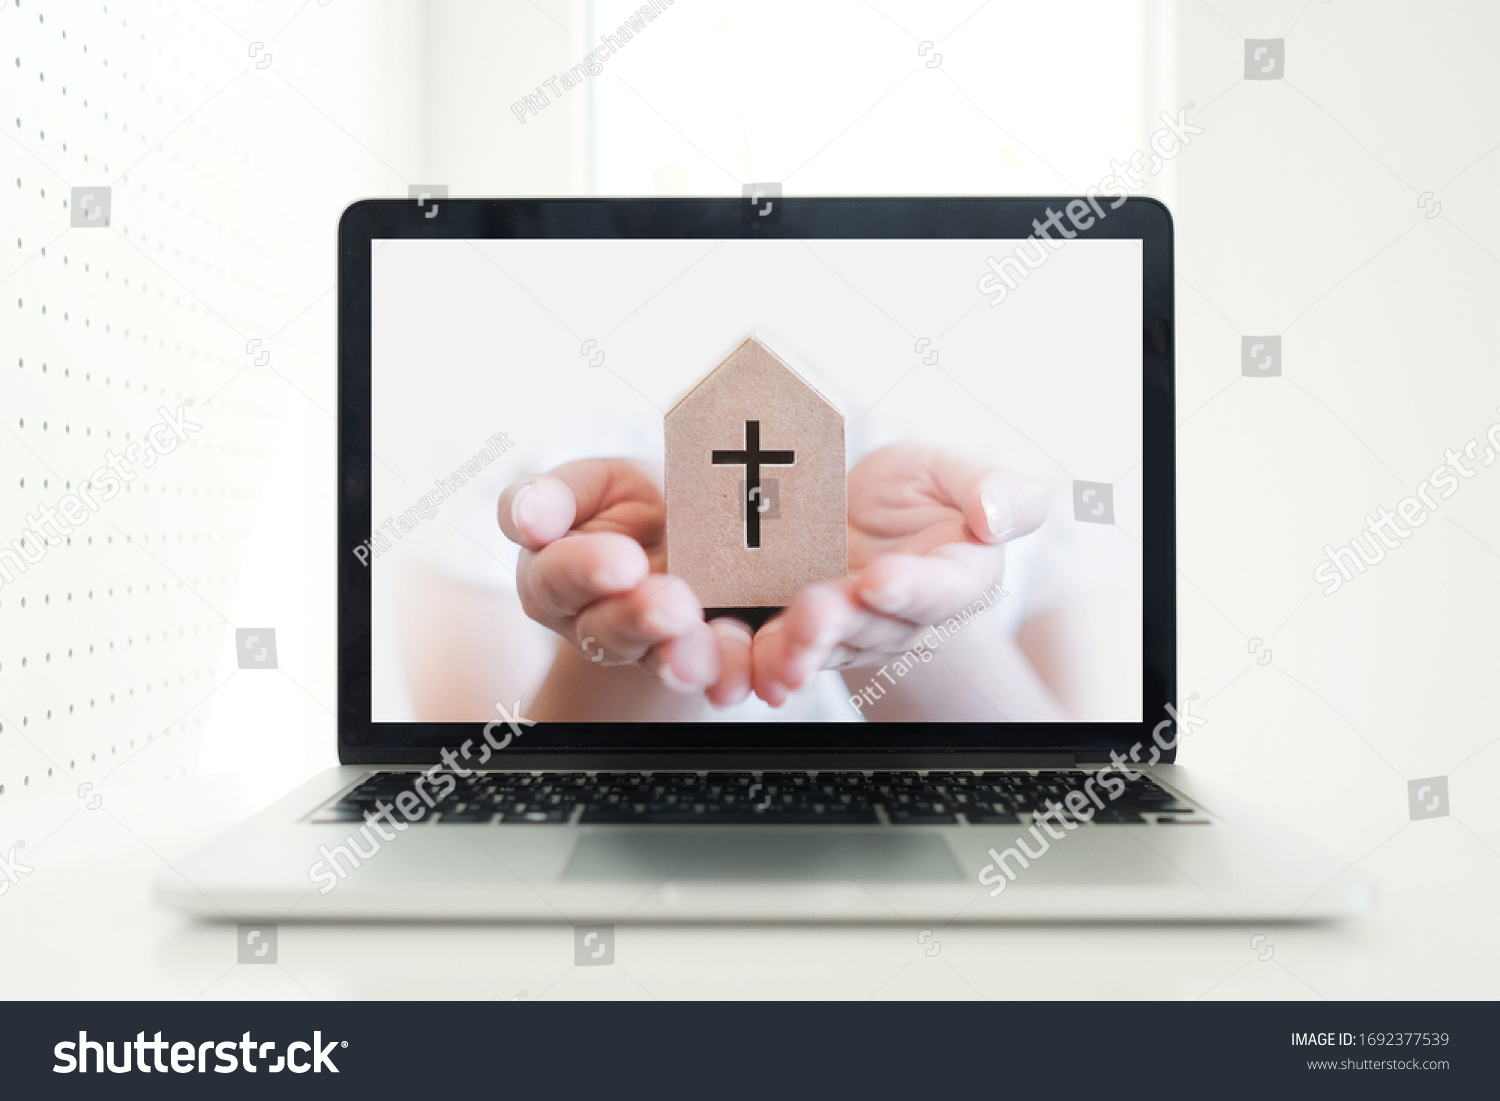 Church services online concept, Home church during quarantine coronavirus Covid-19, Online church from home new normal concept, Cross with hand pop up from screen laptop, spirituality and religion #1692377539